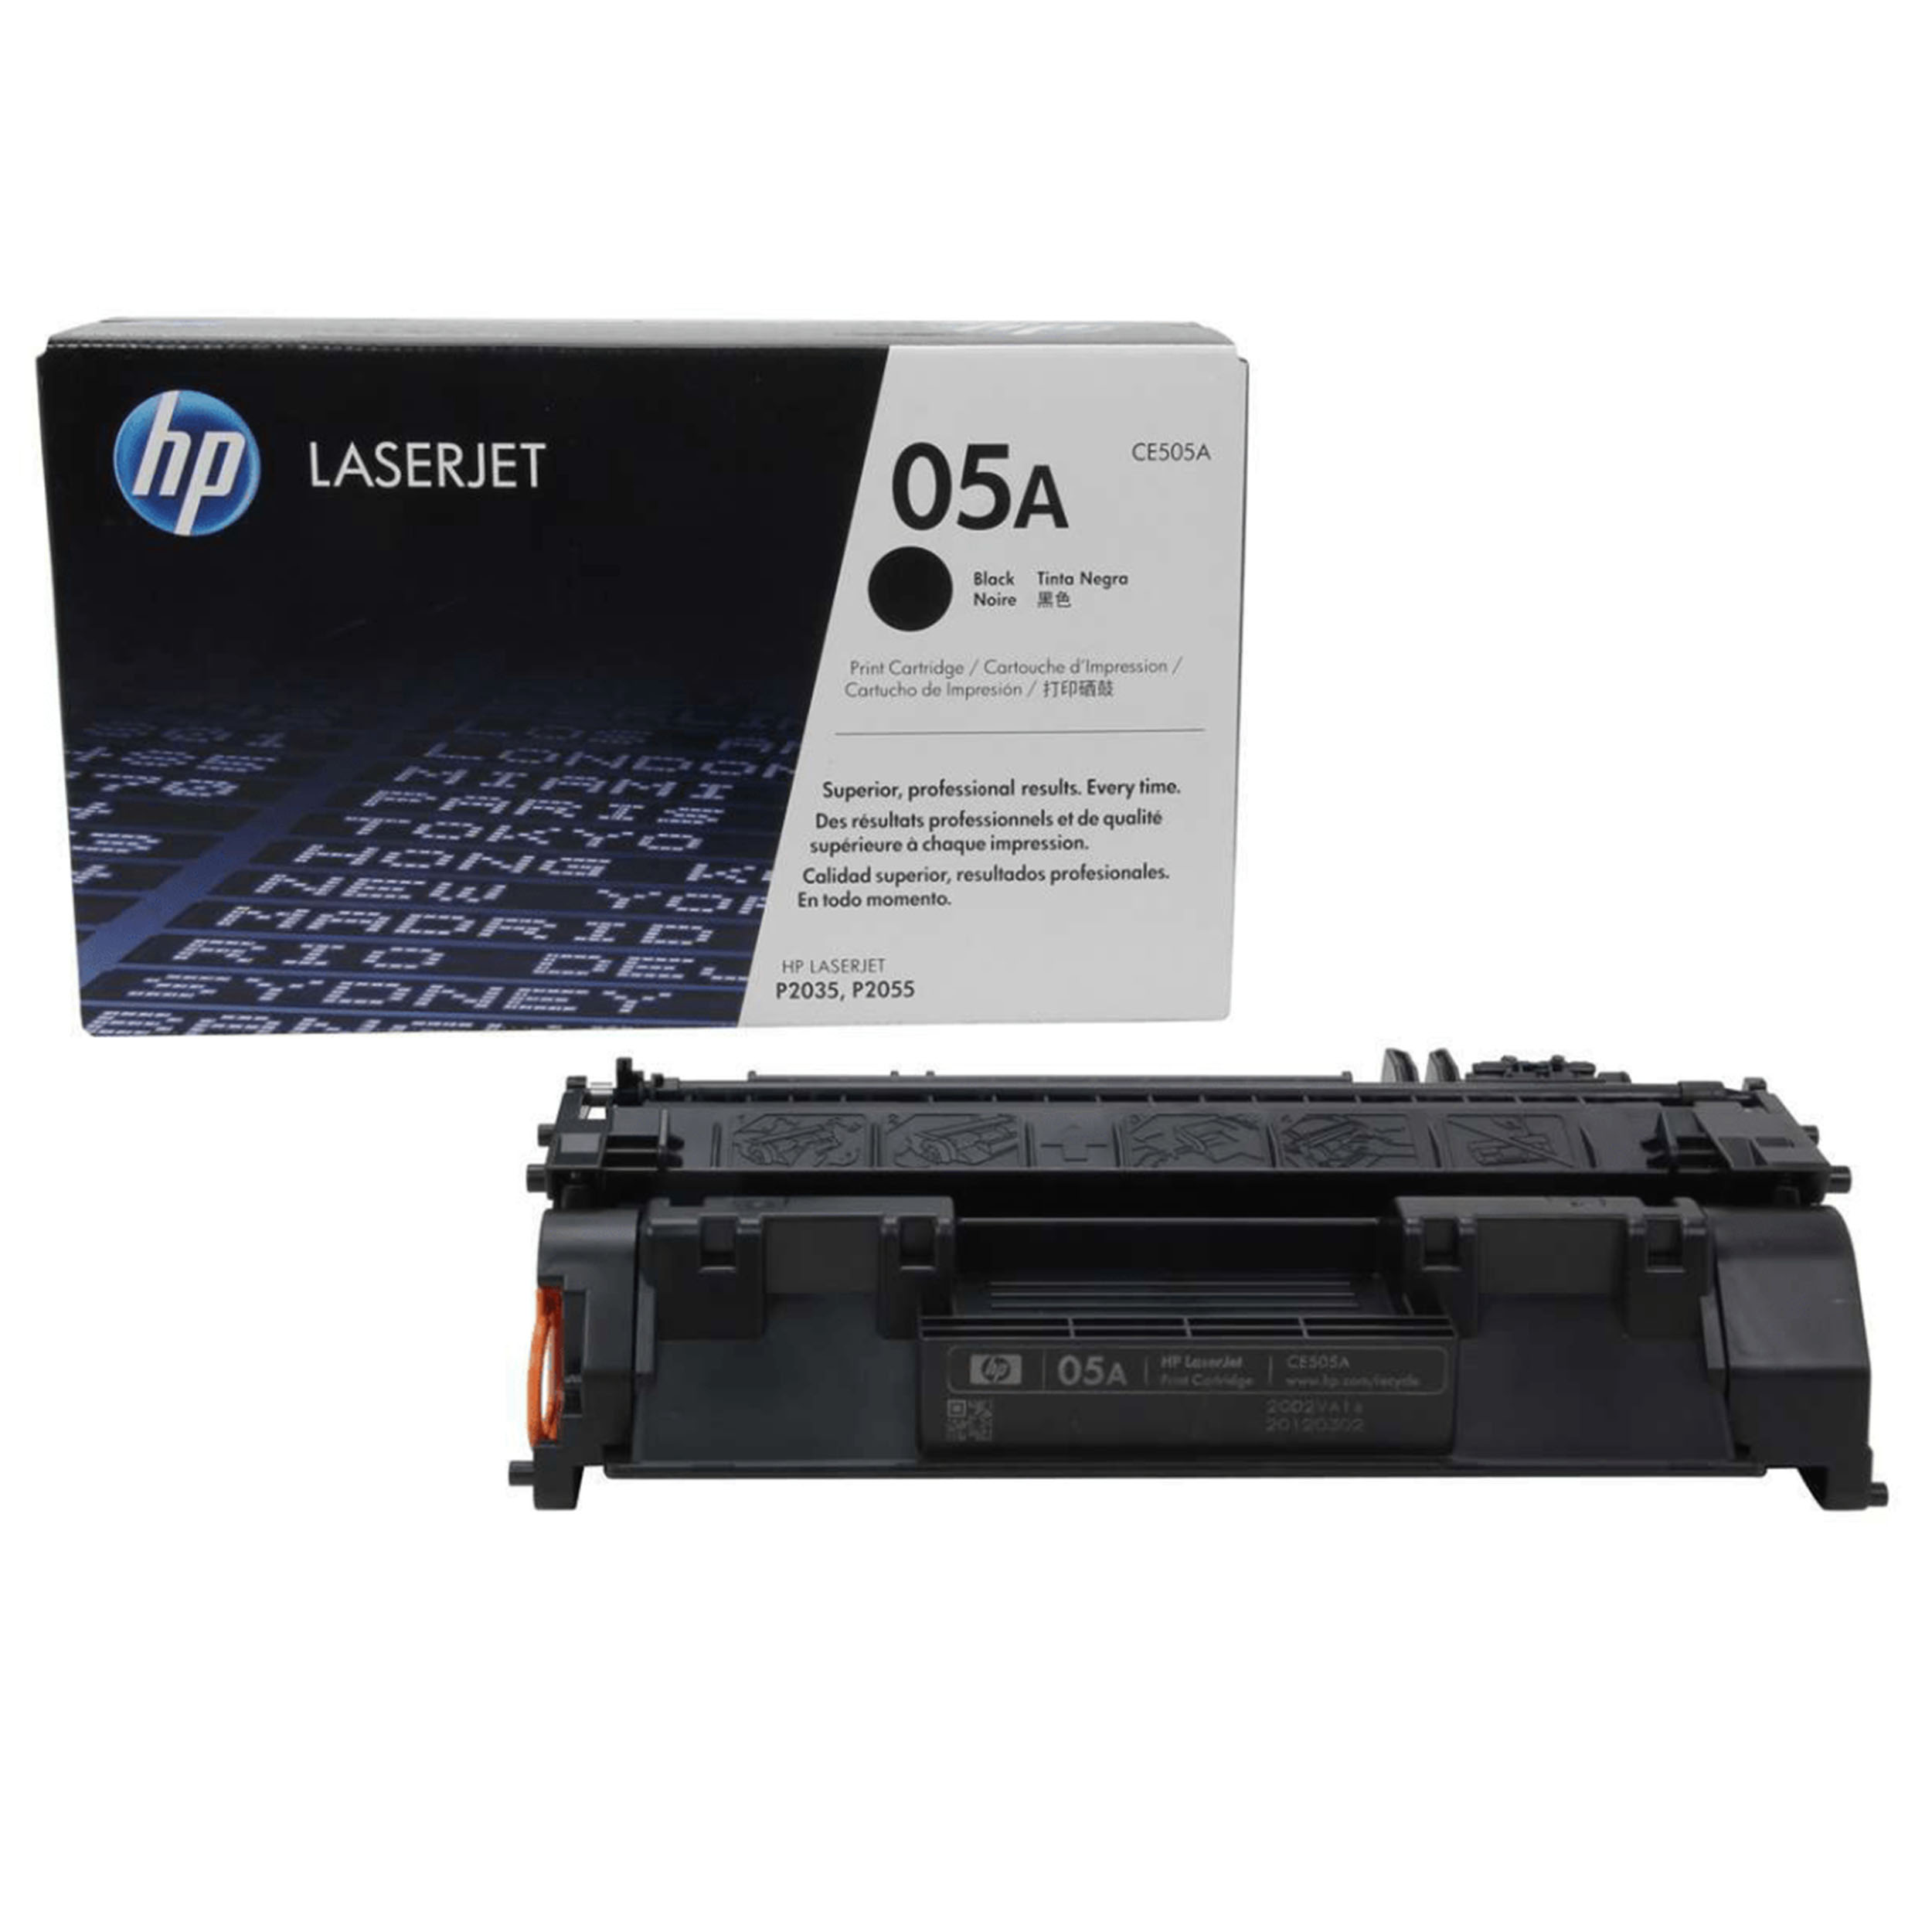 asiatisk Tag fat mindre Original Toner Cartridge For HP 05A (CE505A), Laser, 2300 Pages, Single  Pack, Black - Clear Choice Technical Services